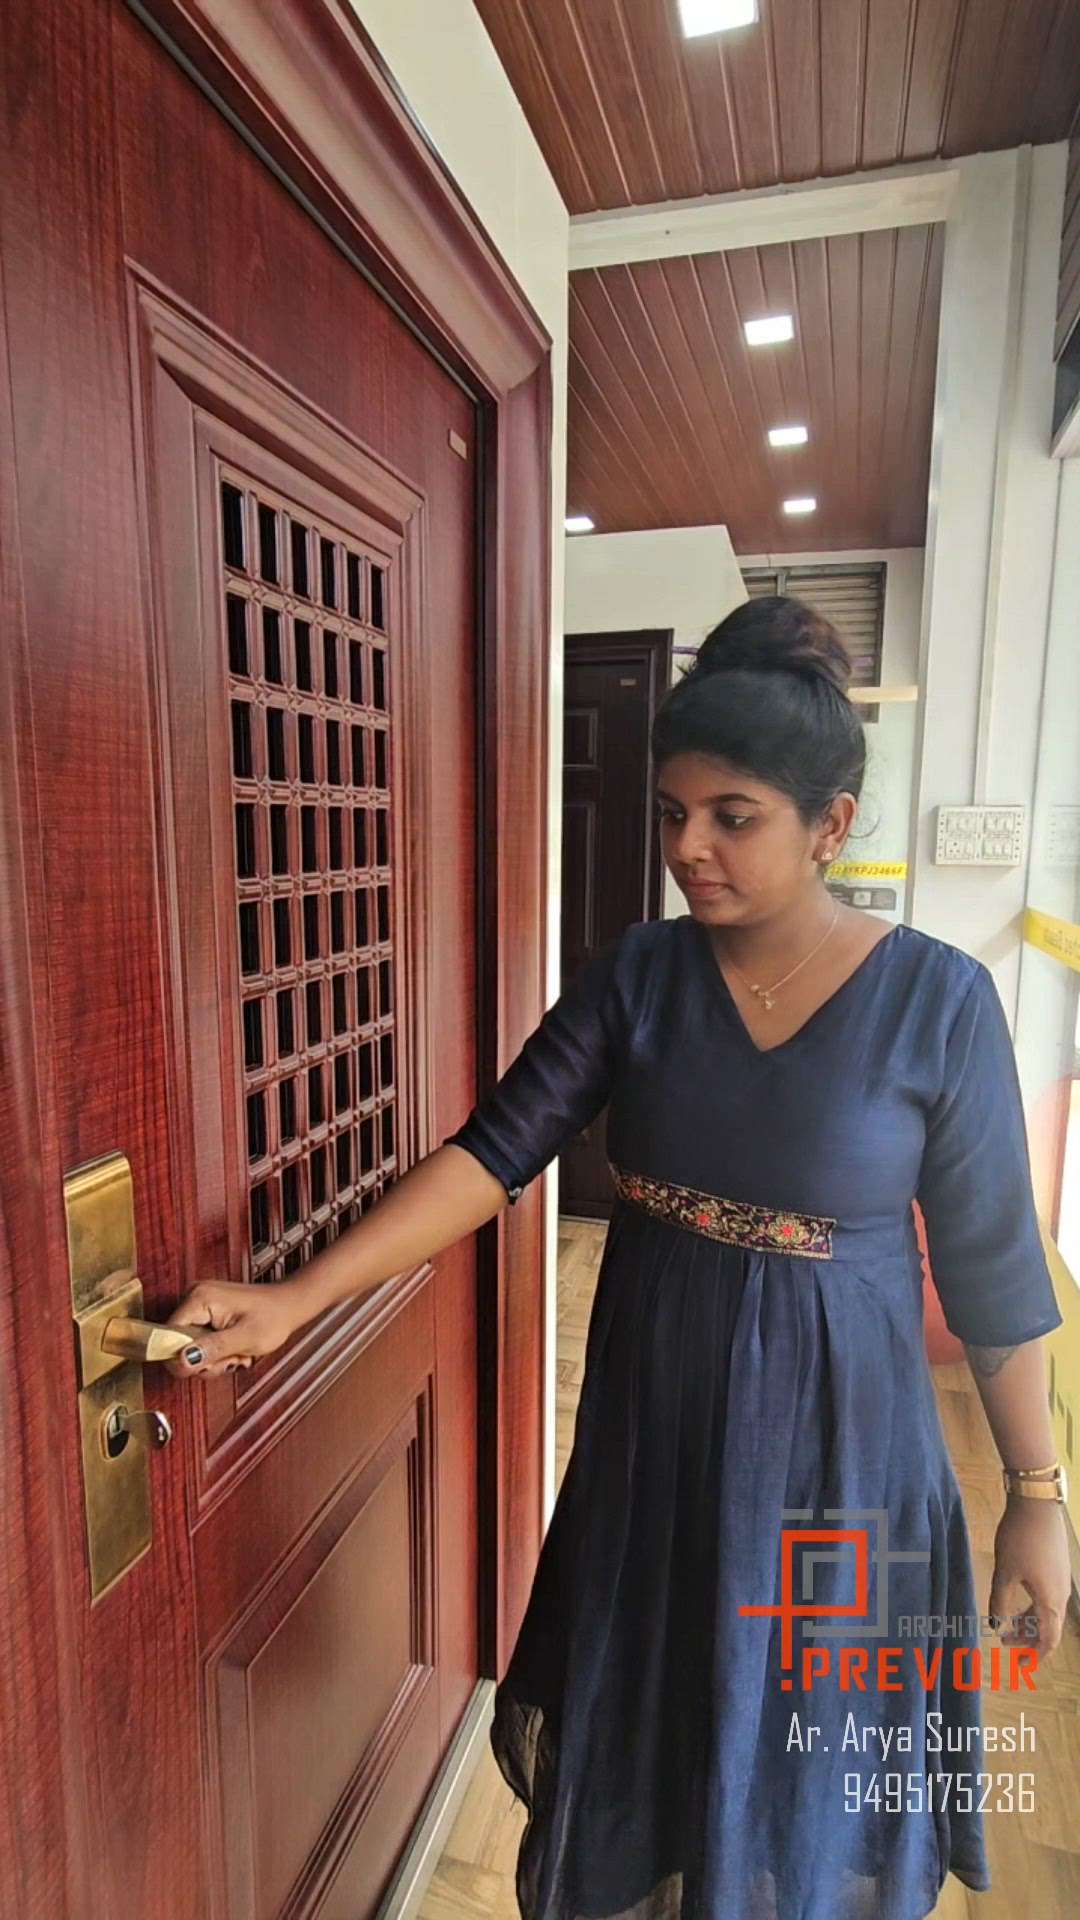 security features of steel doors
#creatorsofkolo #muvattupuzha #ileaf #steeldoors #arya #prevoirarchitects #tips 

Brand Shoutout: I Leaf Caption Link: https://koloapp.in/call/049-542-62993 
Inquiry Number: 049-542-62993

 Brand Page: https:/ /koloapp.in/feeds/1663155424?title=i-Leaf